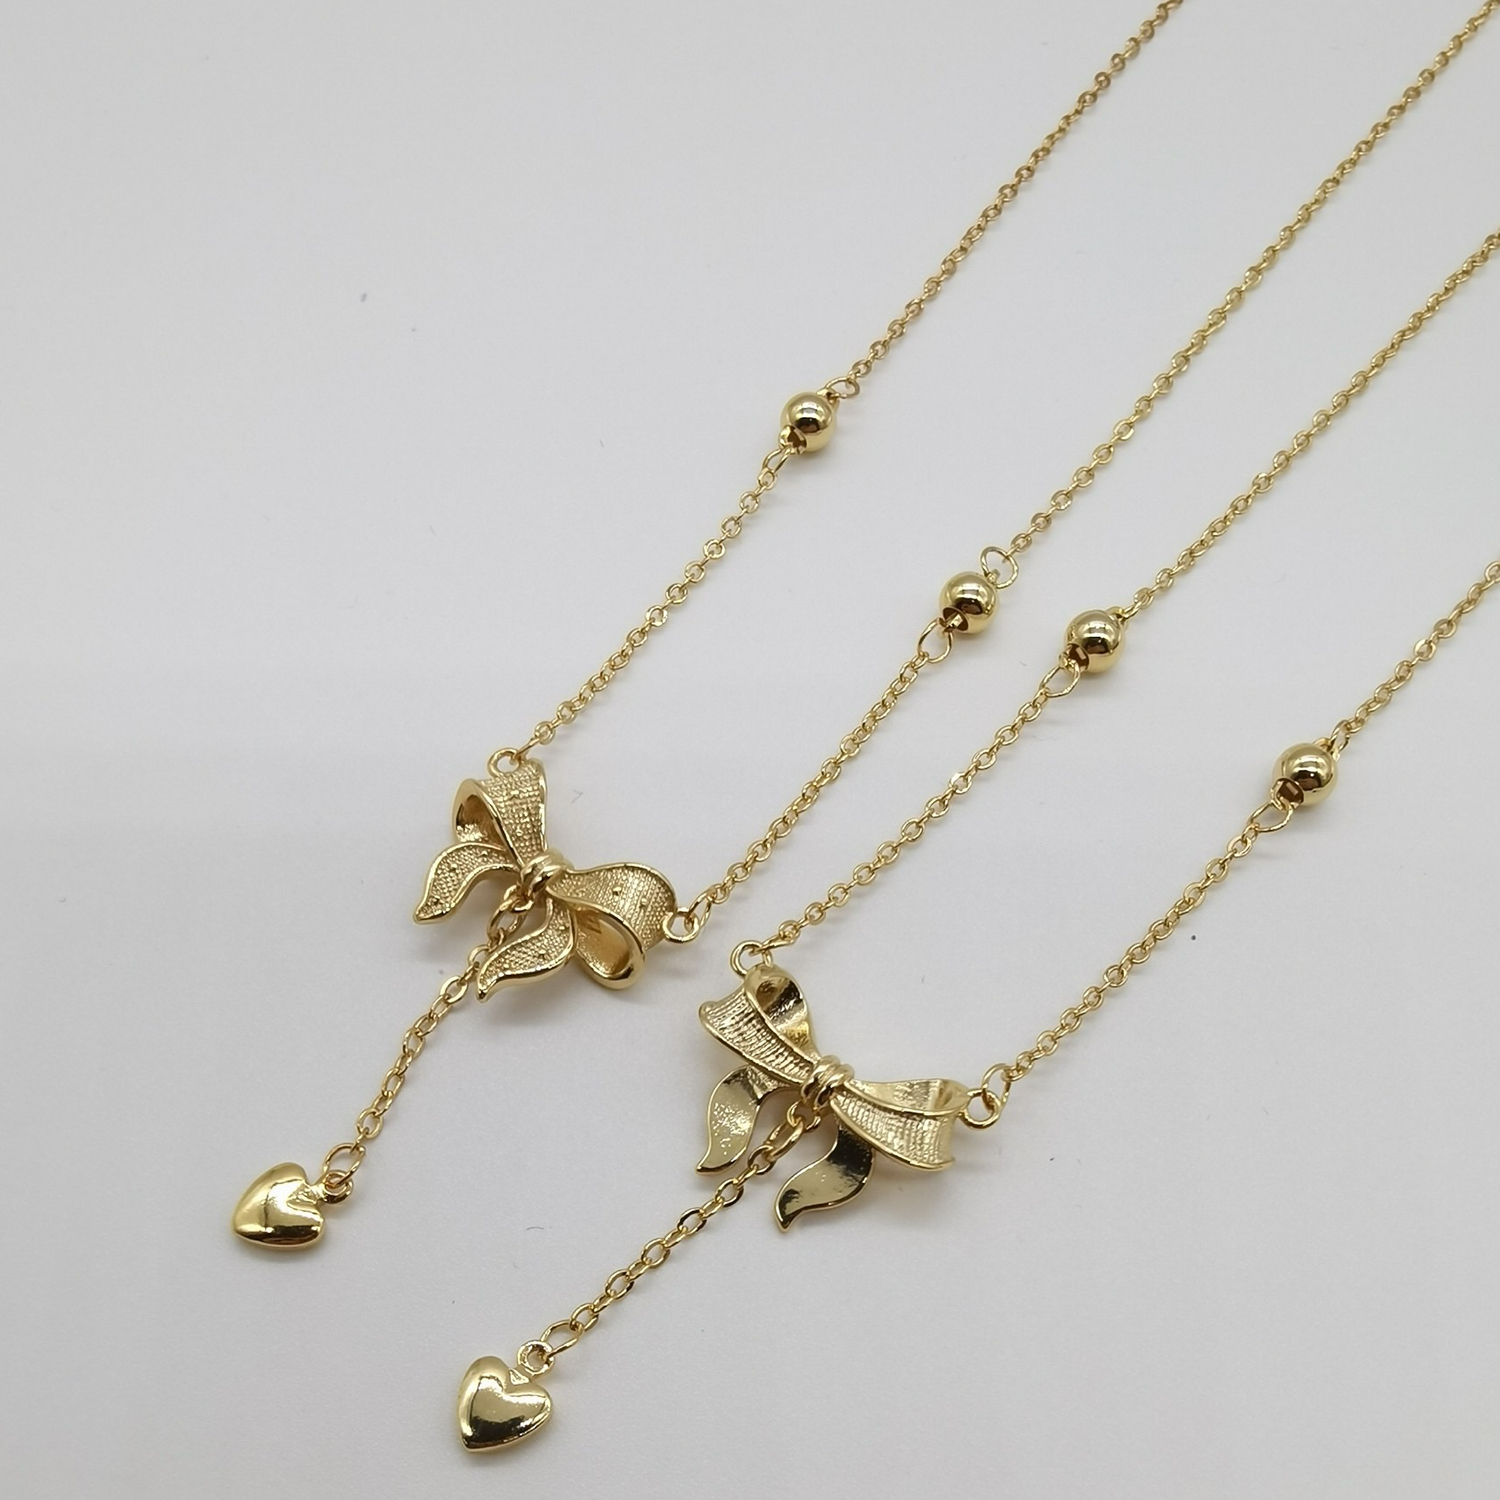 Alluvial gold vacuum electroplating 24K gold fugitive princess butterfly necklace